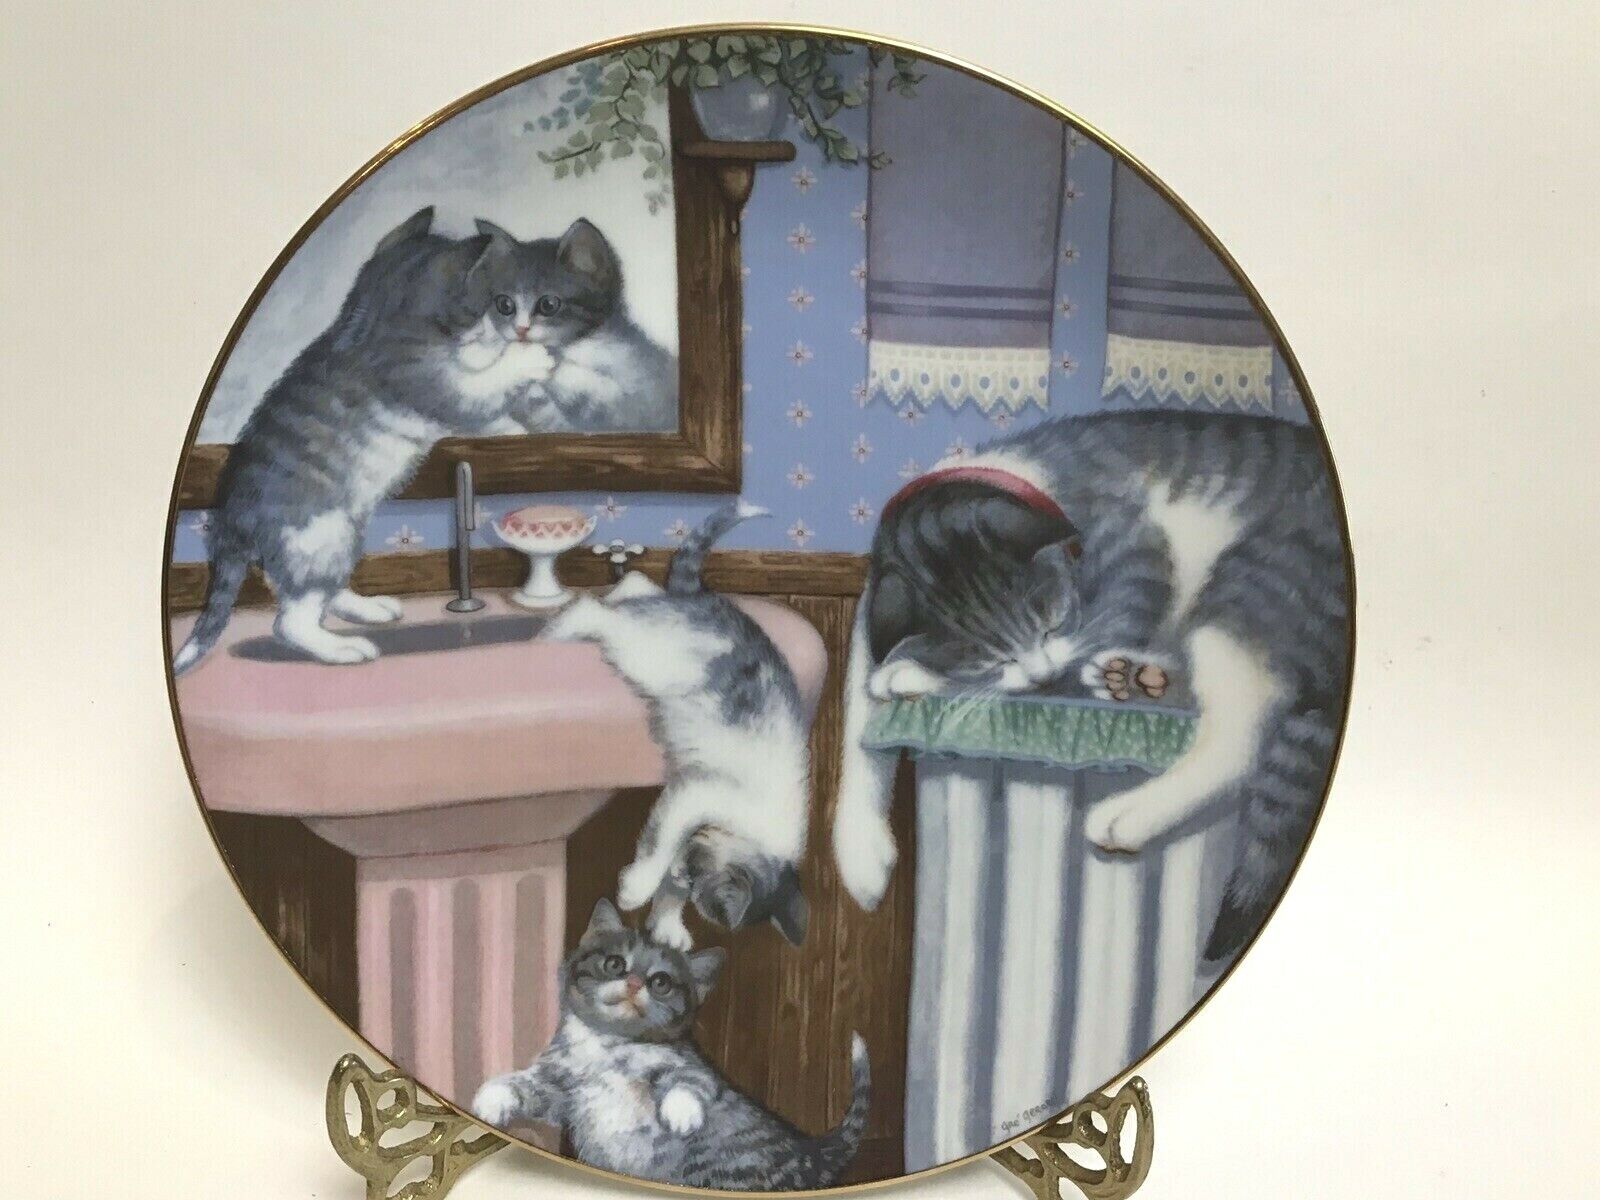 1988 Hamilton Country Kitties Mischief Makers By Gerardi Collectors Plate #4681n